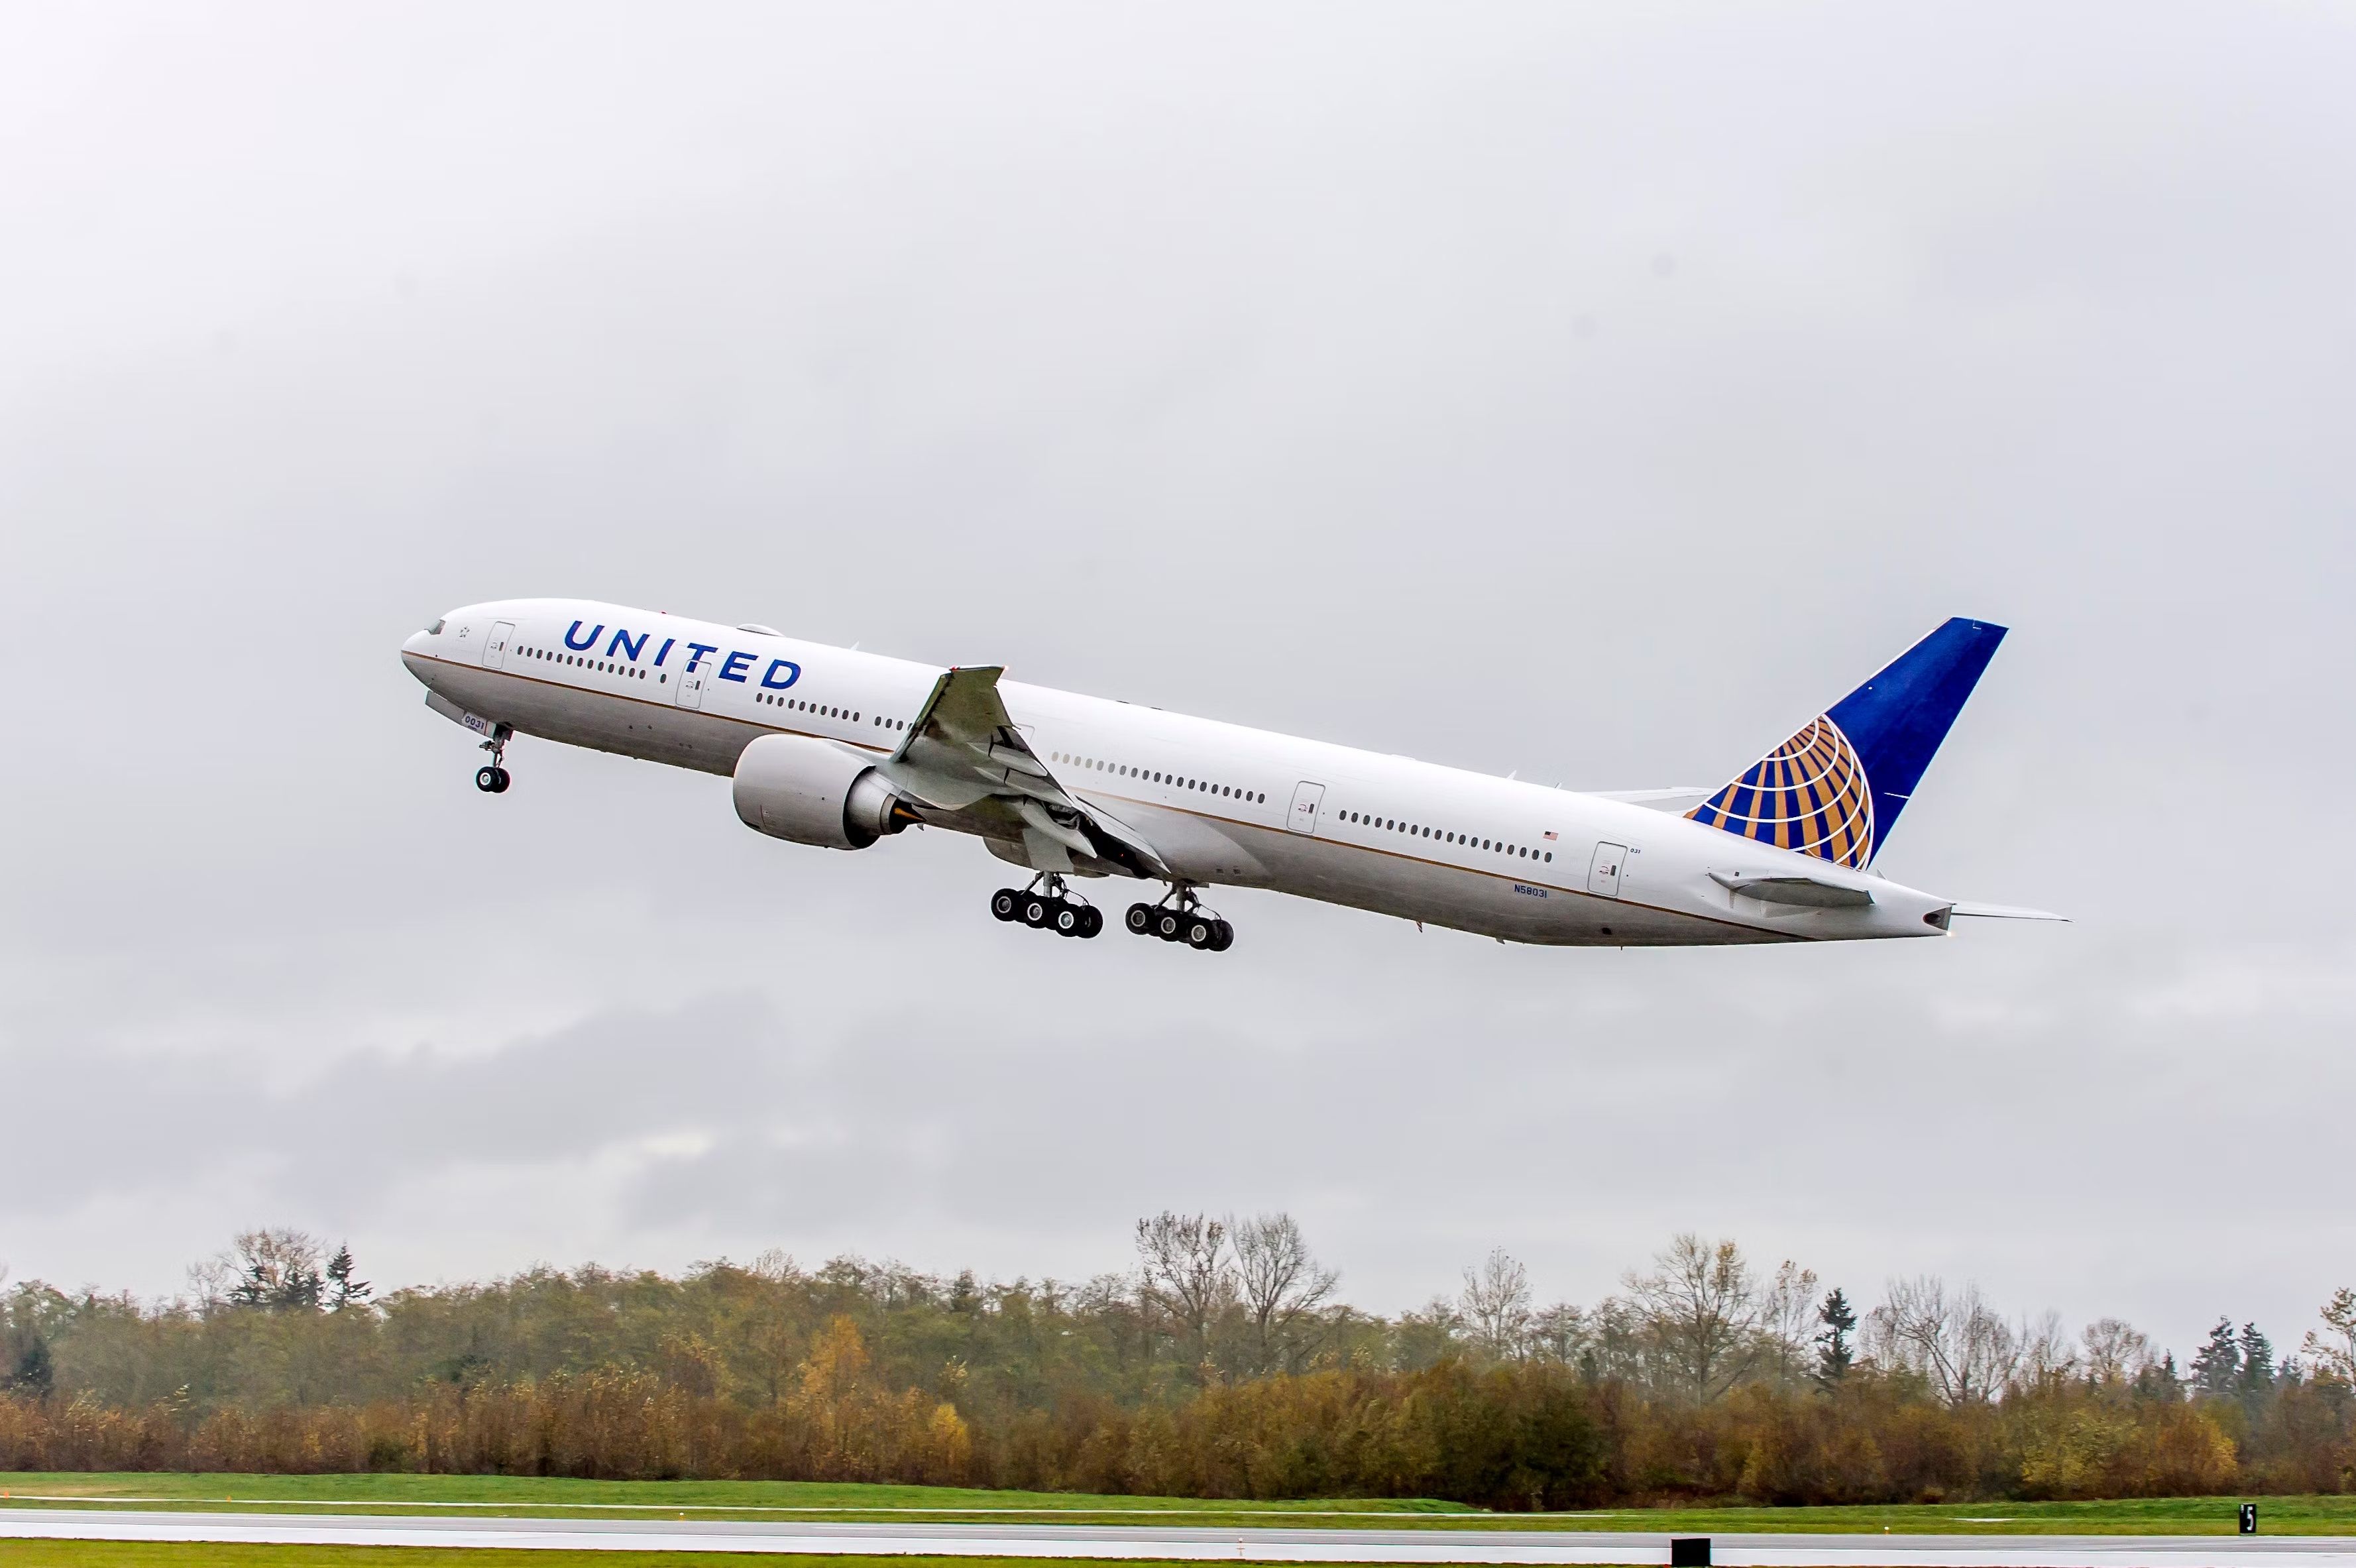 A United Airlines 777-300ER just after take off.